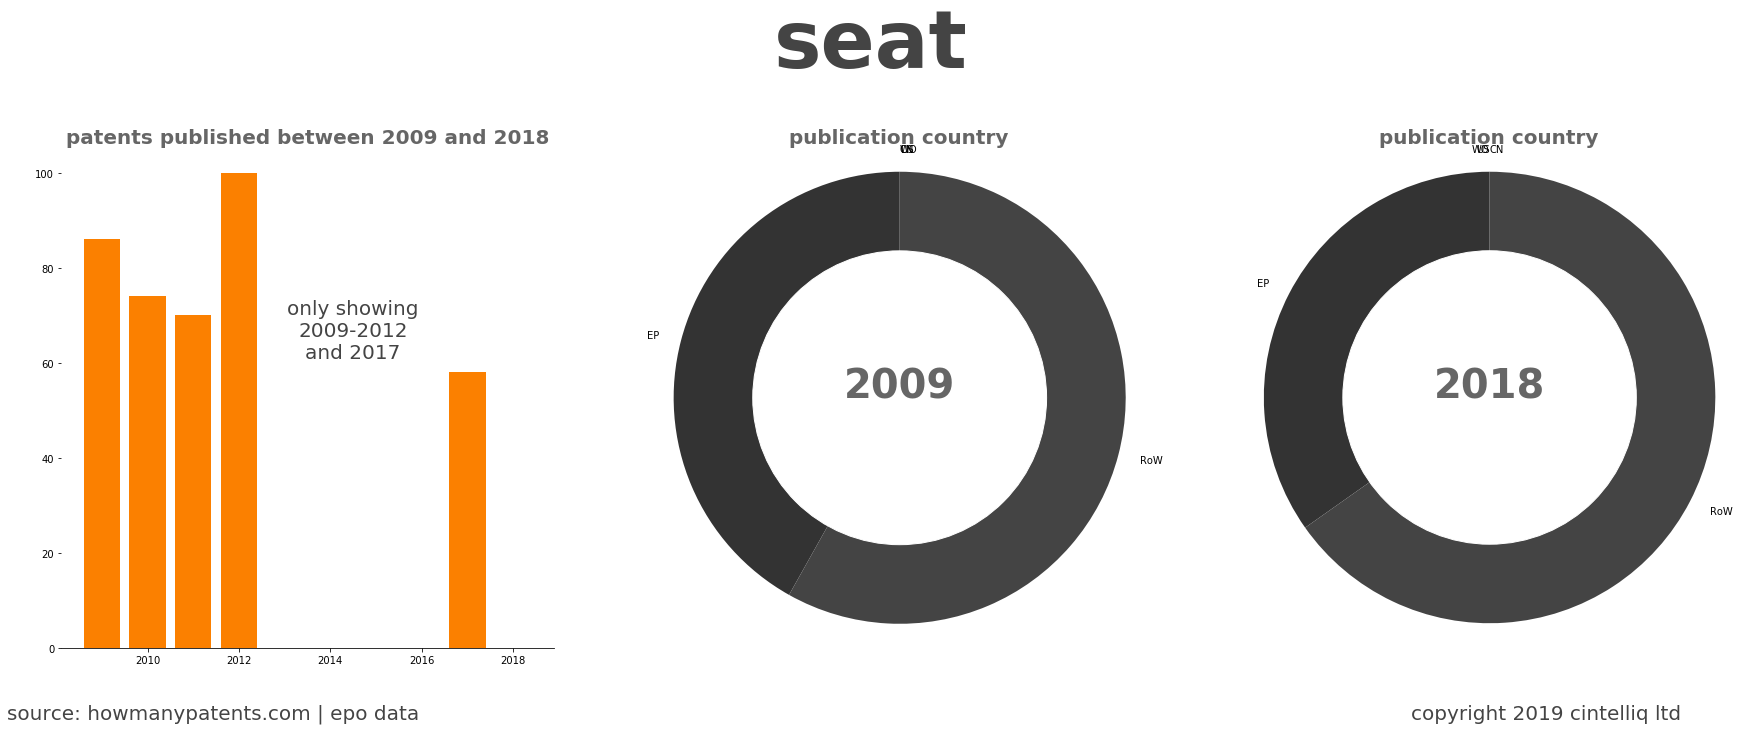 summary of patents for Seat